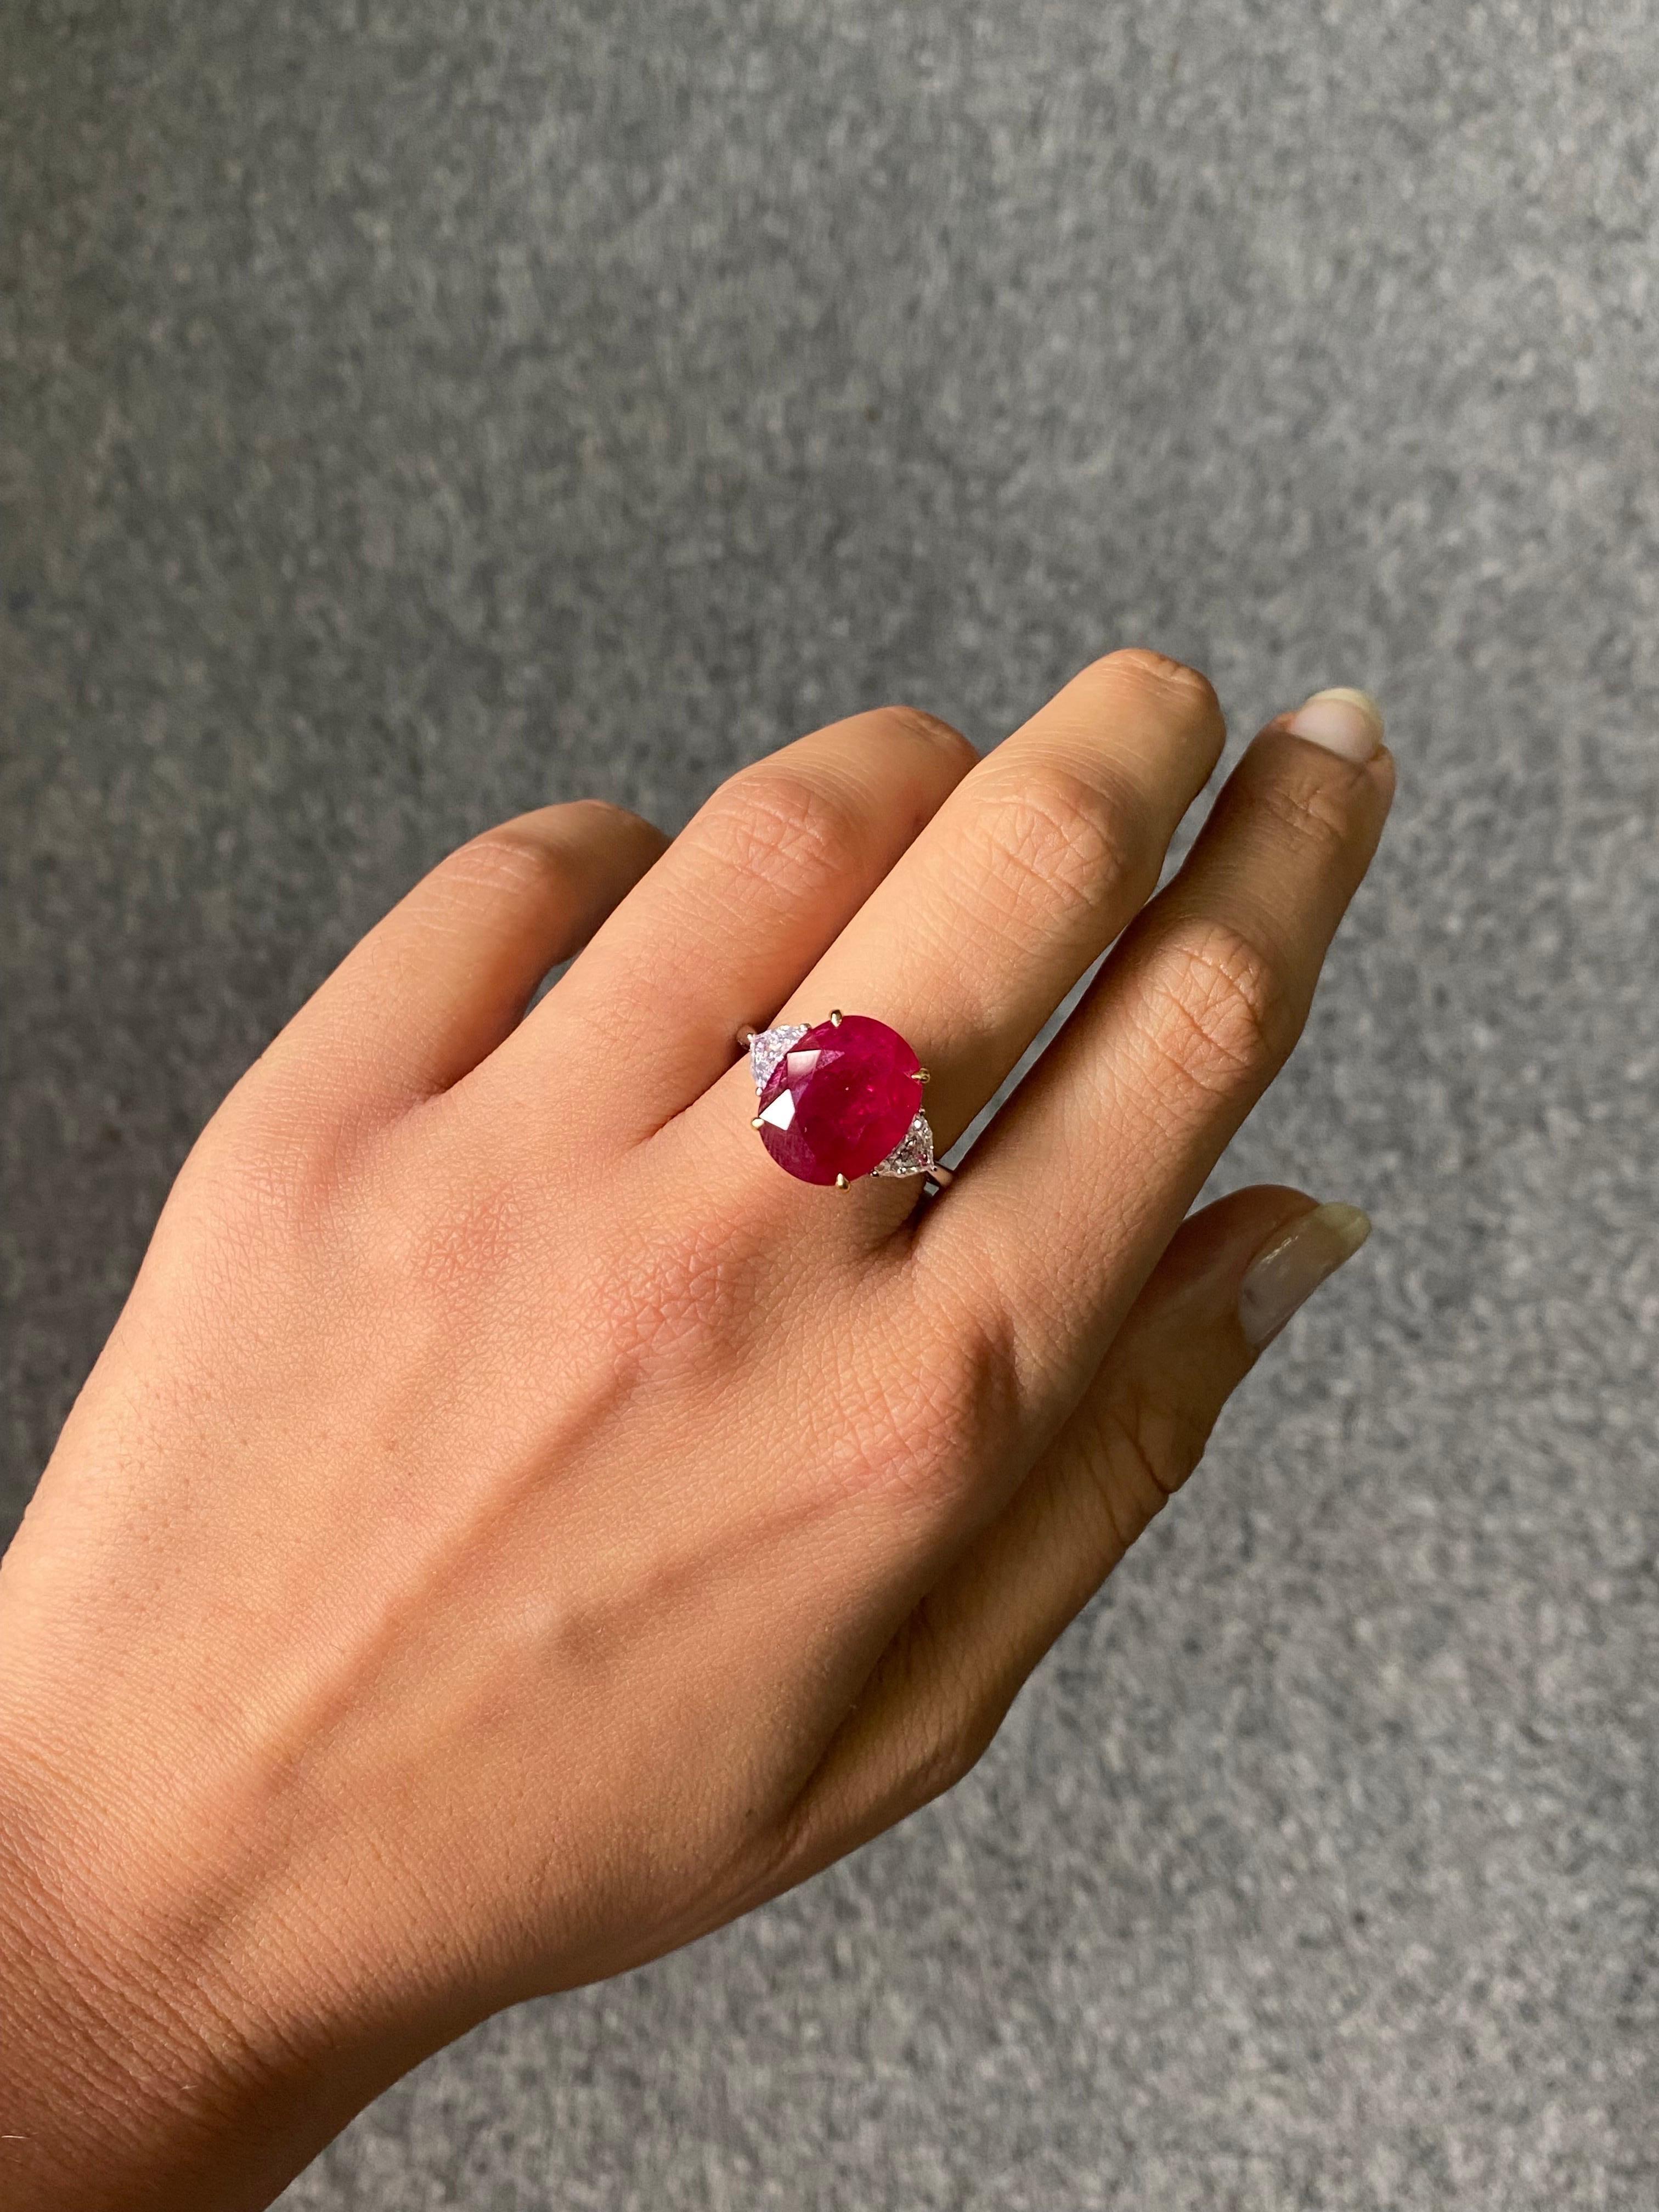 A stunning 8.11 carat certified natural, Mozambique Ruby, vivid red color and transparent. The center piece is adorned with 0.63 carat half moon side stone Diamonds, VS quality, G color. The ring is currently sized at US 7, can be resized. We